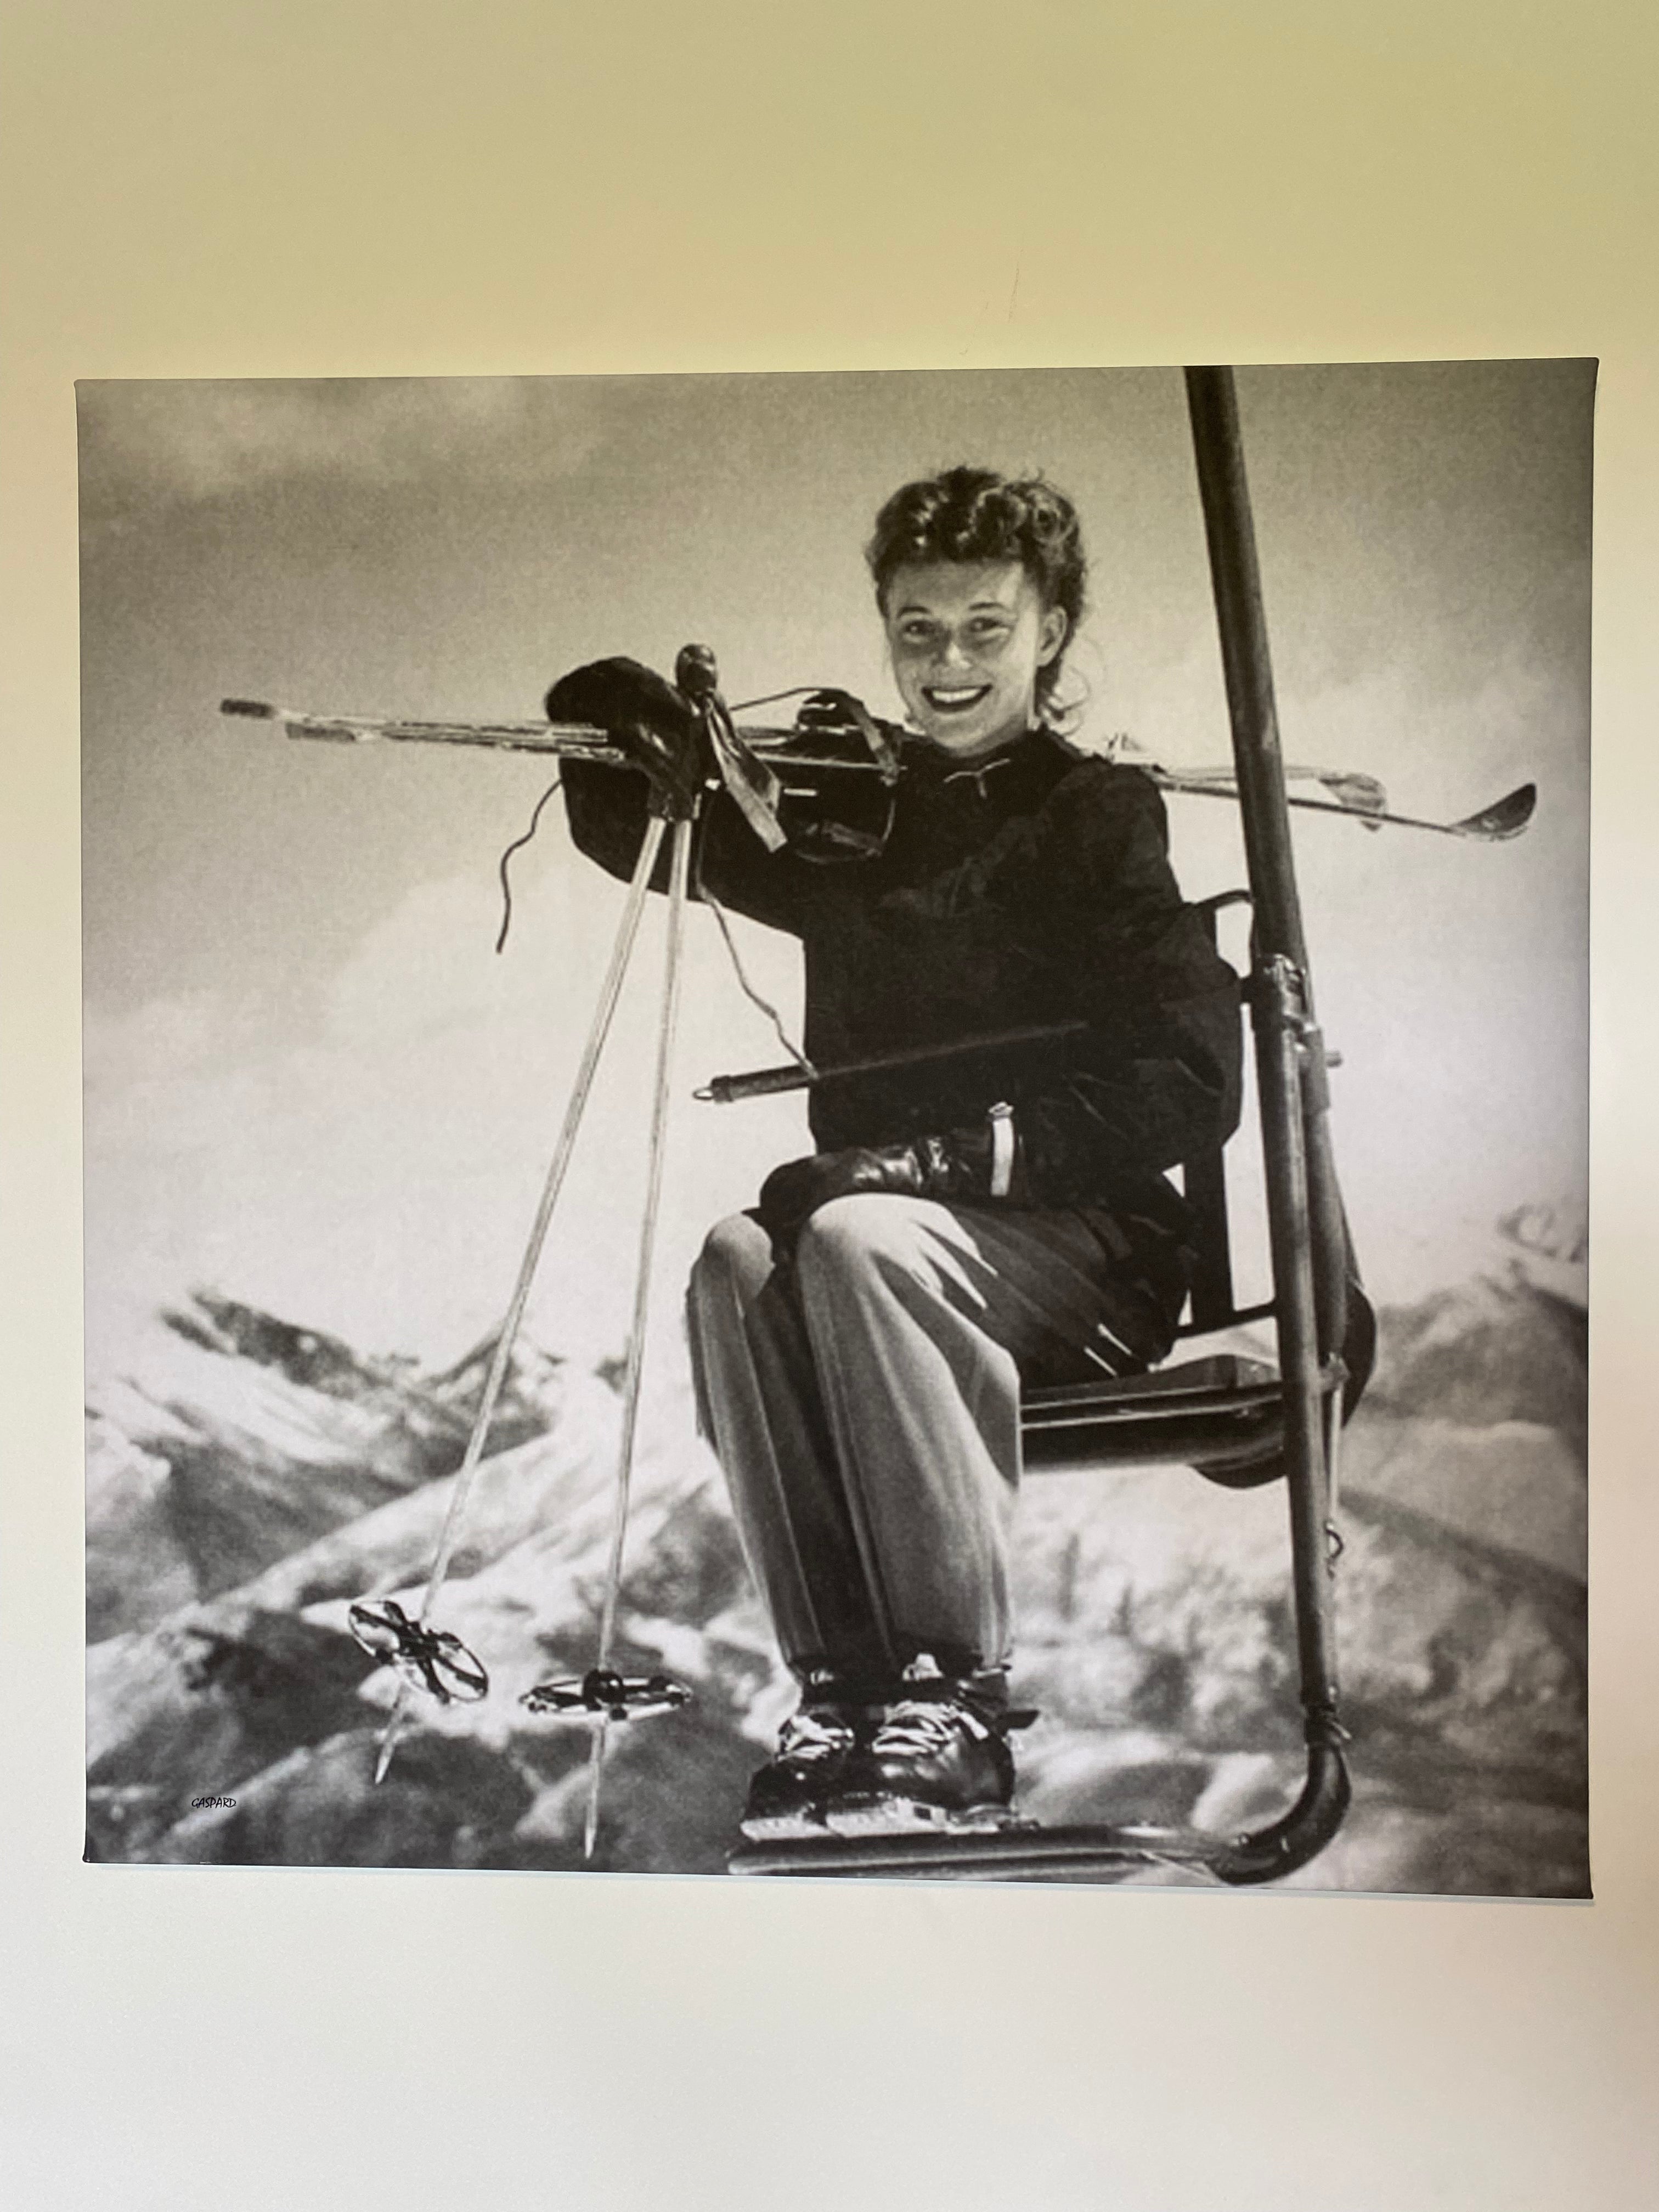 A black and white vintage photo depicting a smiling woman wearing a dark coloured ski jacket, light coloured ski pants and dark leather lace up ski boots,  sitting on a single seat chairlift in foreground with wooden skis and poles on her shoulders looking directly at the camera, with snow covered mountains in the background. Hanging on a white wall